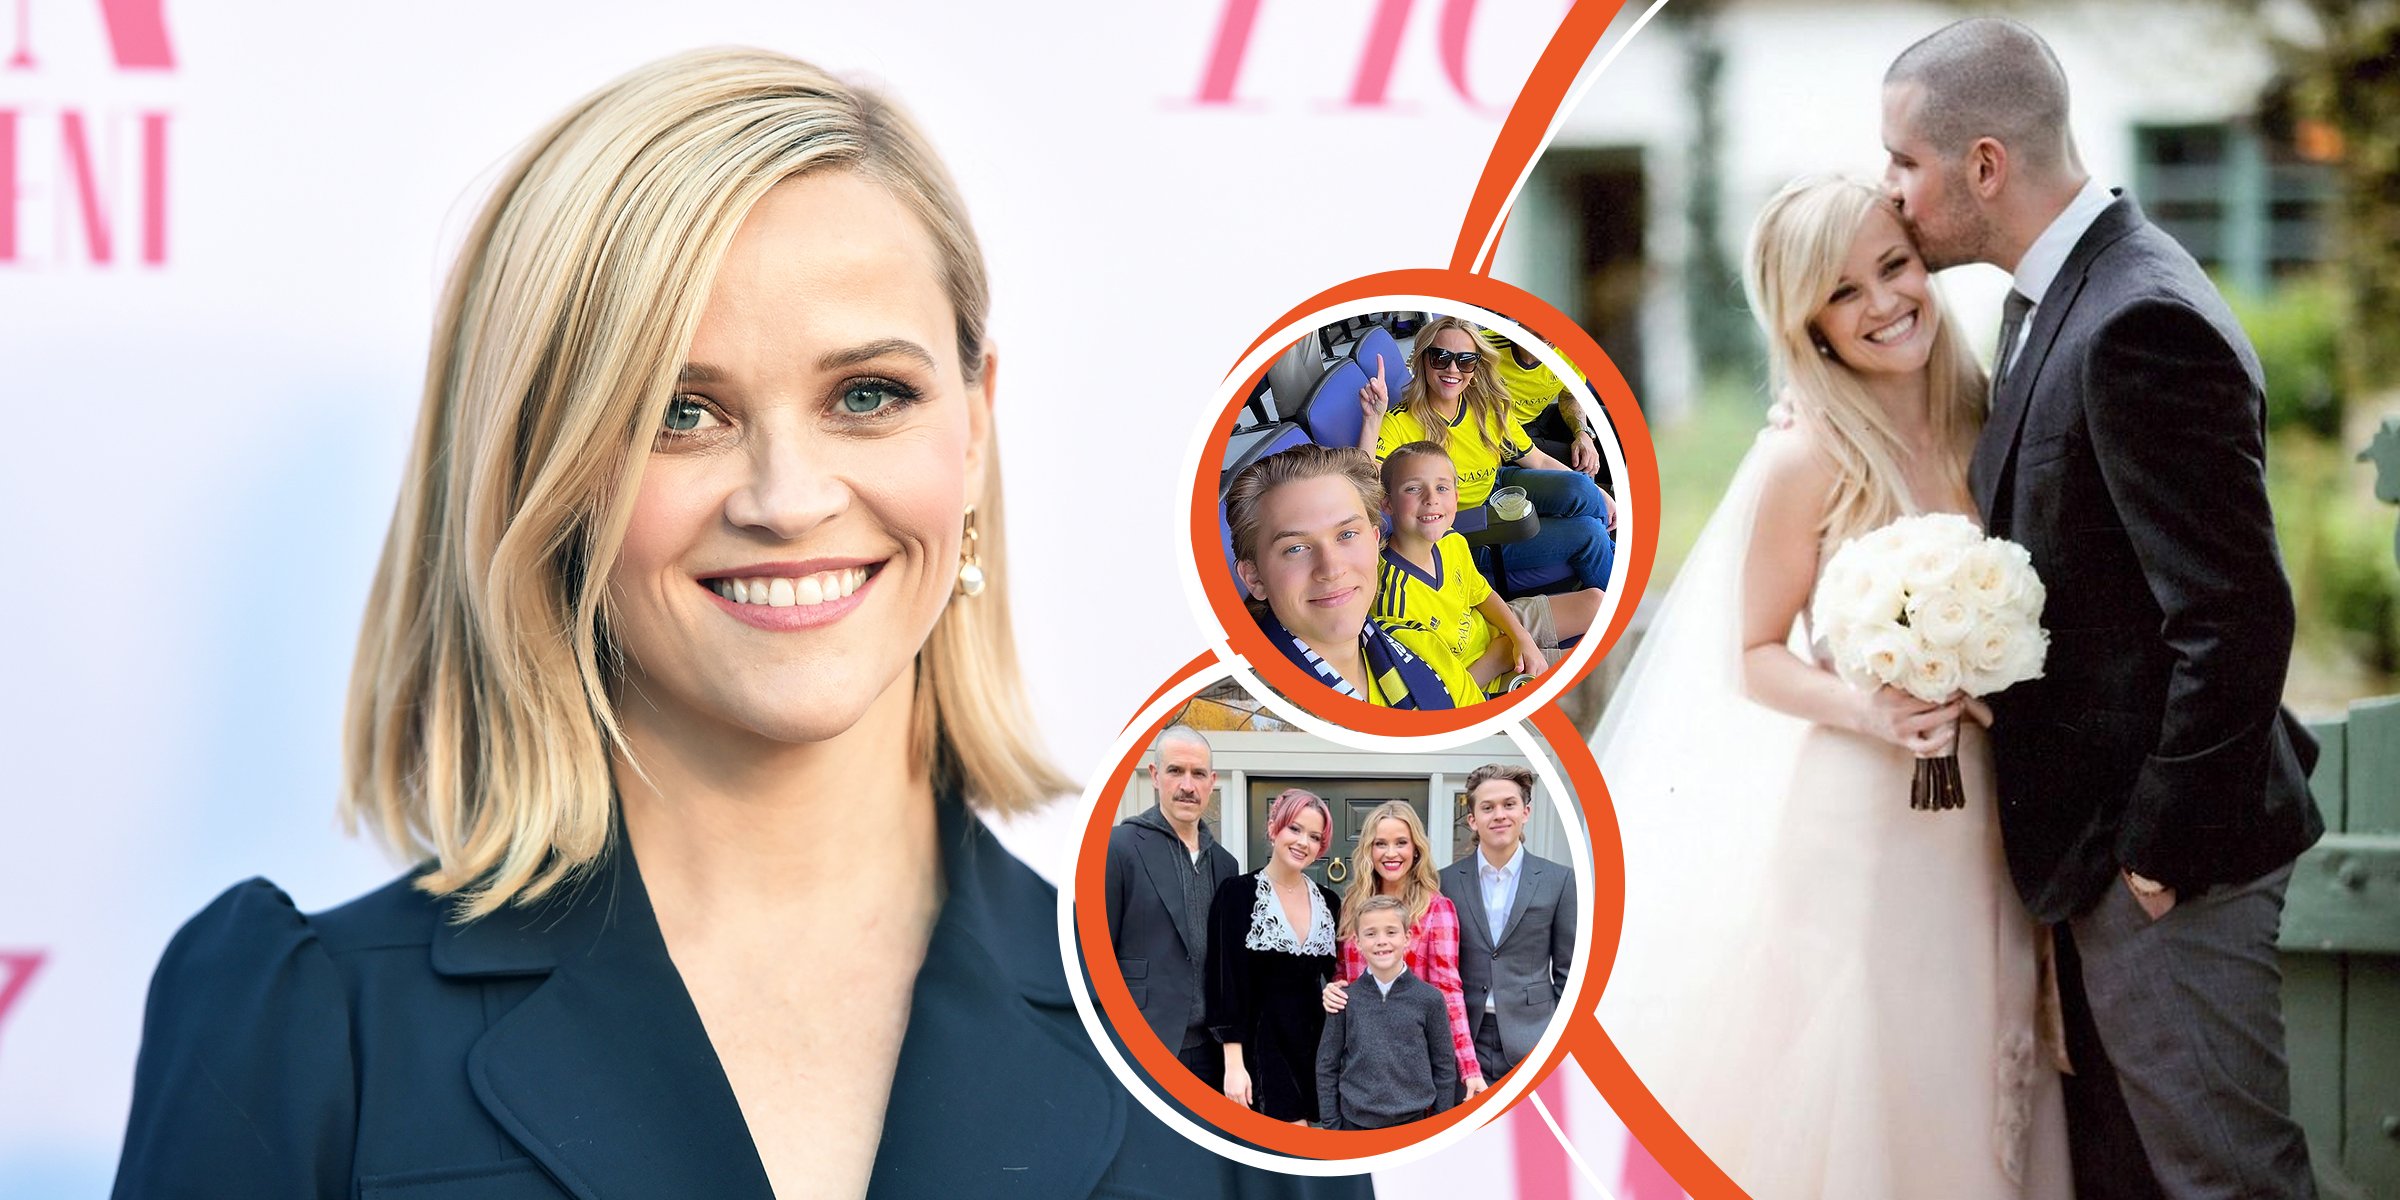 Reese Witherspoon | Reese Witherspoon, Jim Toth, Ava, Tennessee und Deacon | James Toth, Reese Witherspoon, Deacon und Tennessee | James Toth und Reese Witherspoon | Quelle: Getty Images | instagram.com/reesewitherspoon